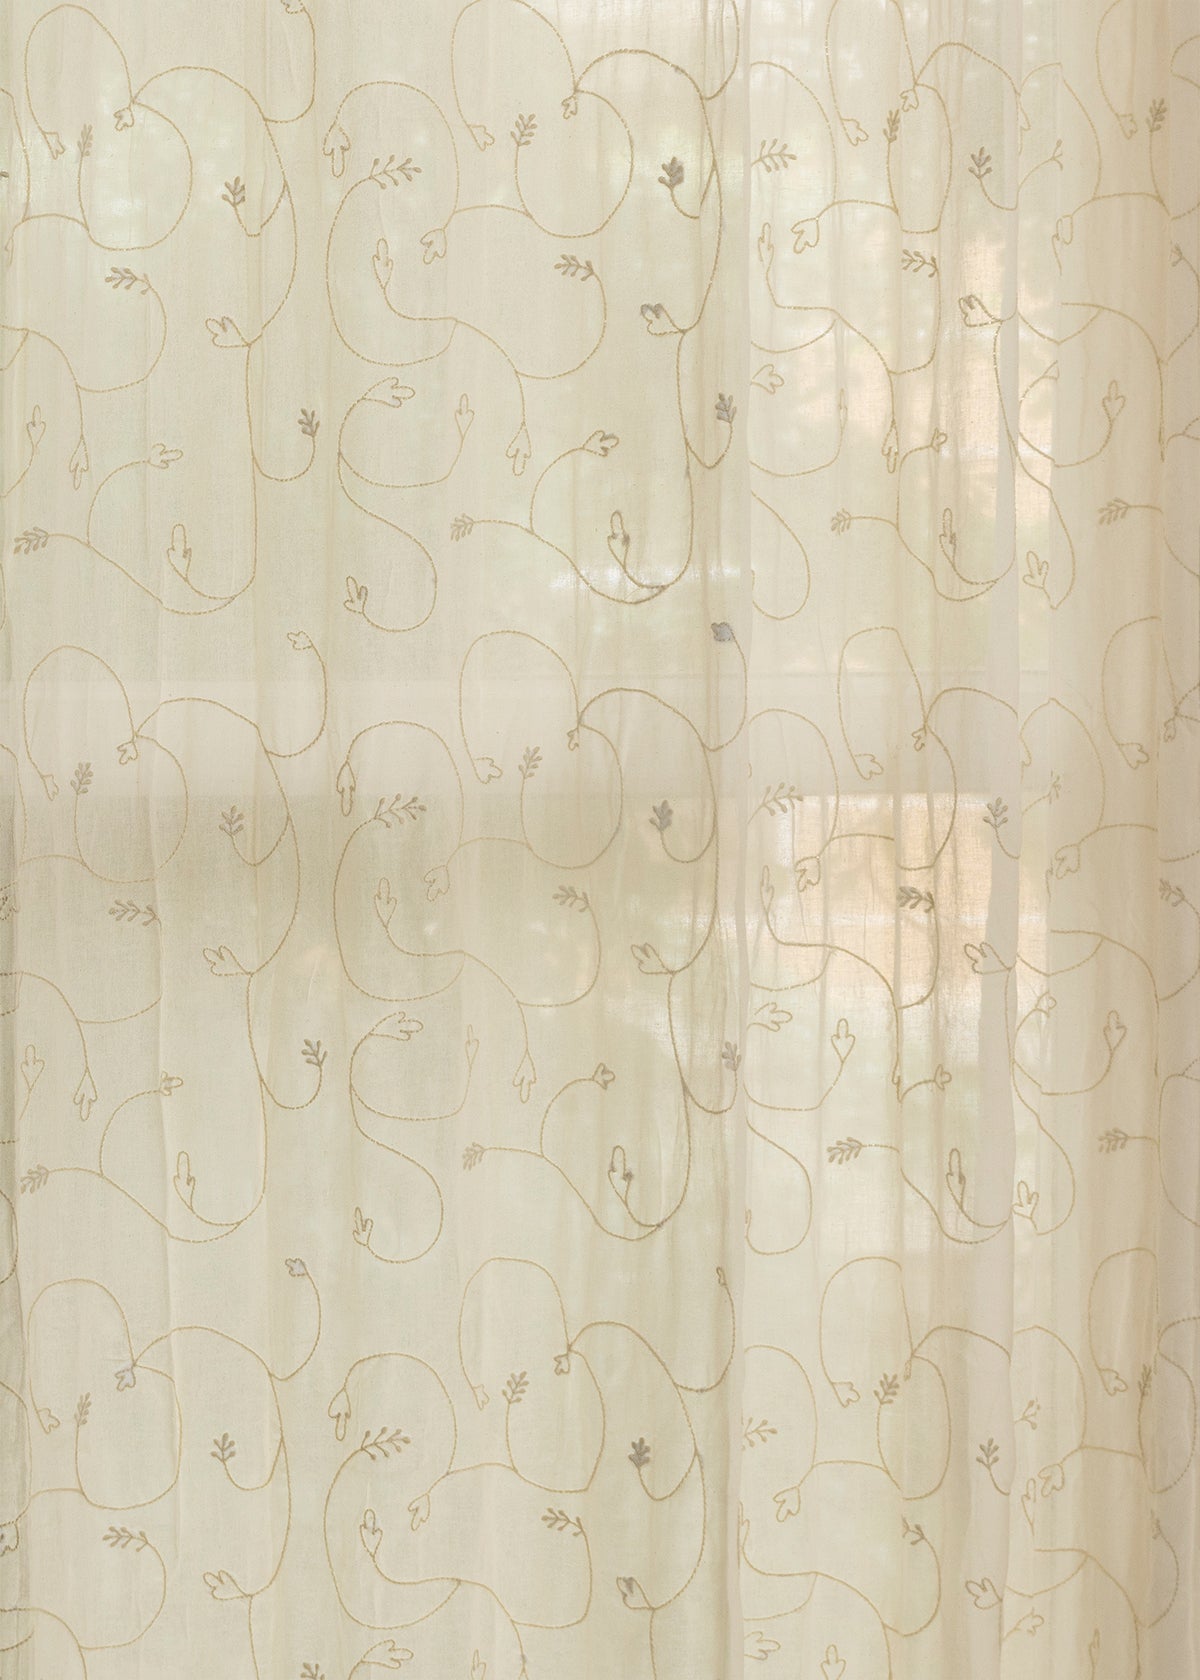 Ivy Vines 100% cotton sheer embroidered minimal curtain for living room -  Light filtering - Cream - Pack of 1